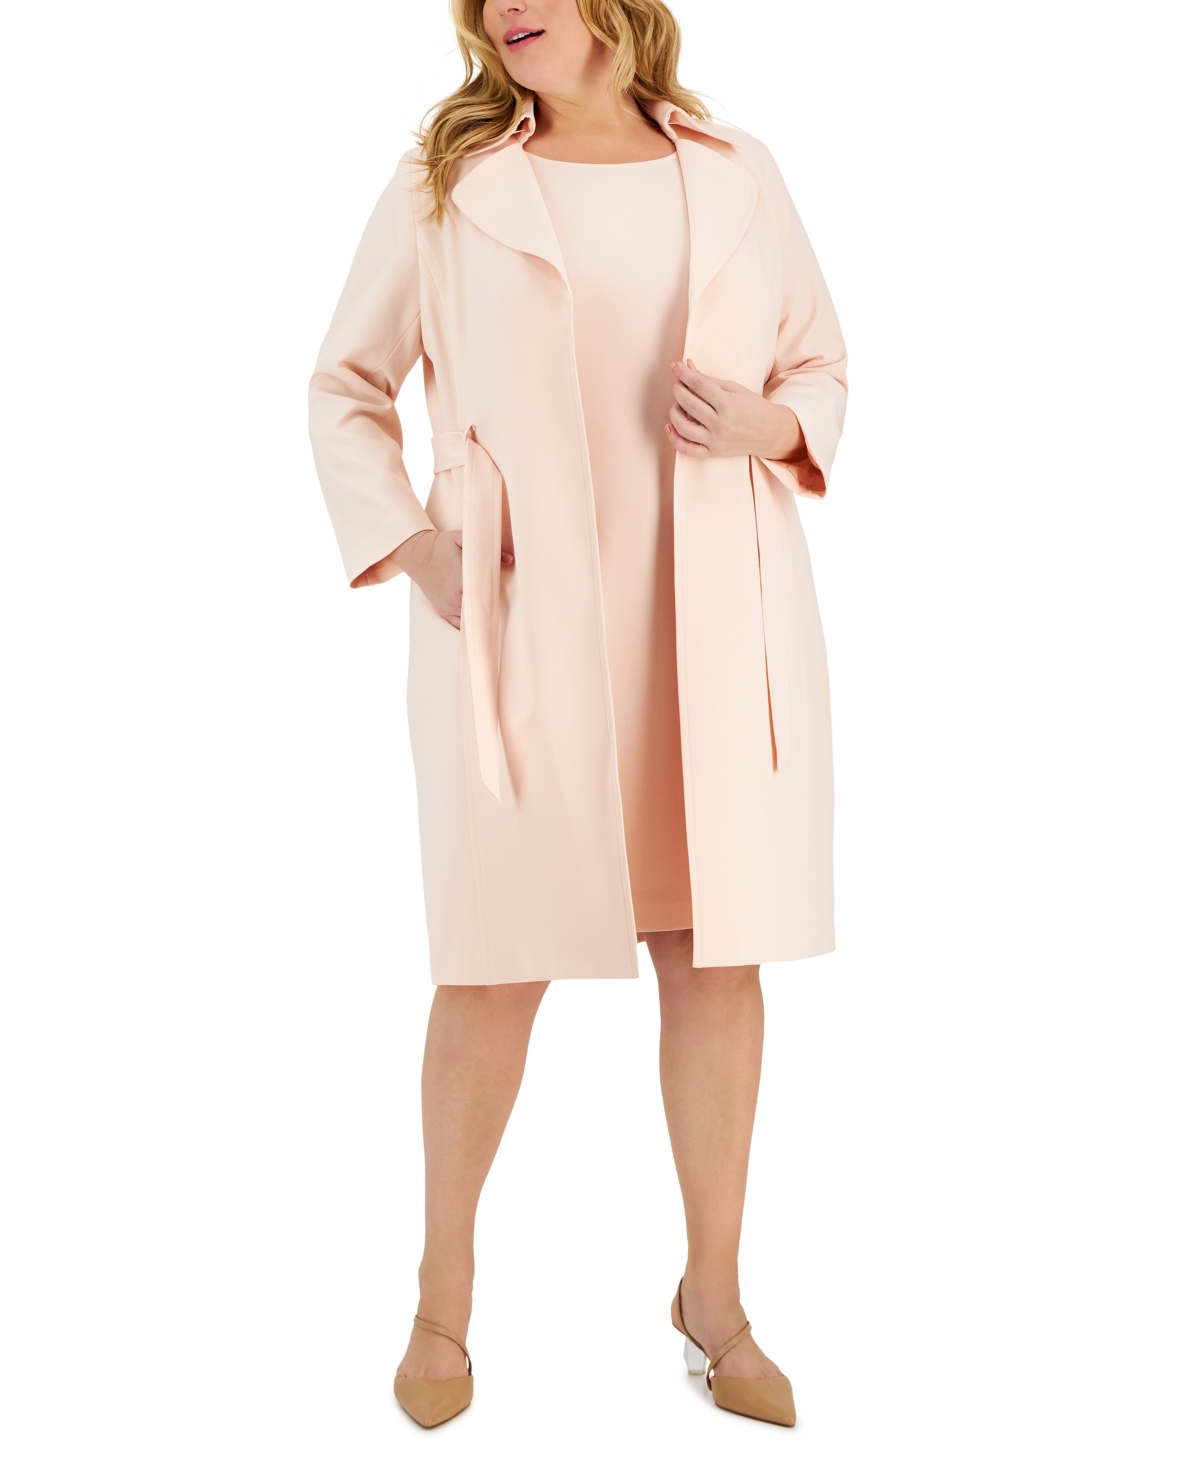 Plus Size Belted Trench Jacket and Sheath Dress - Light Blossom